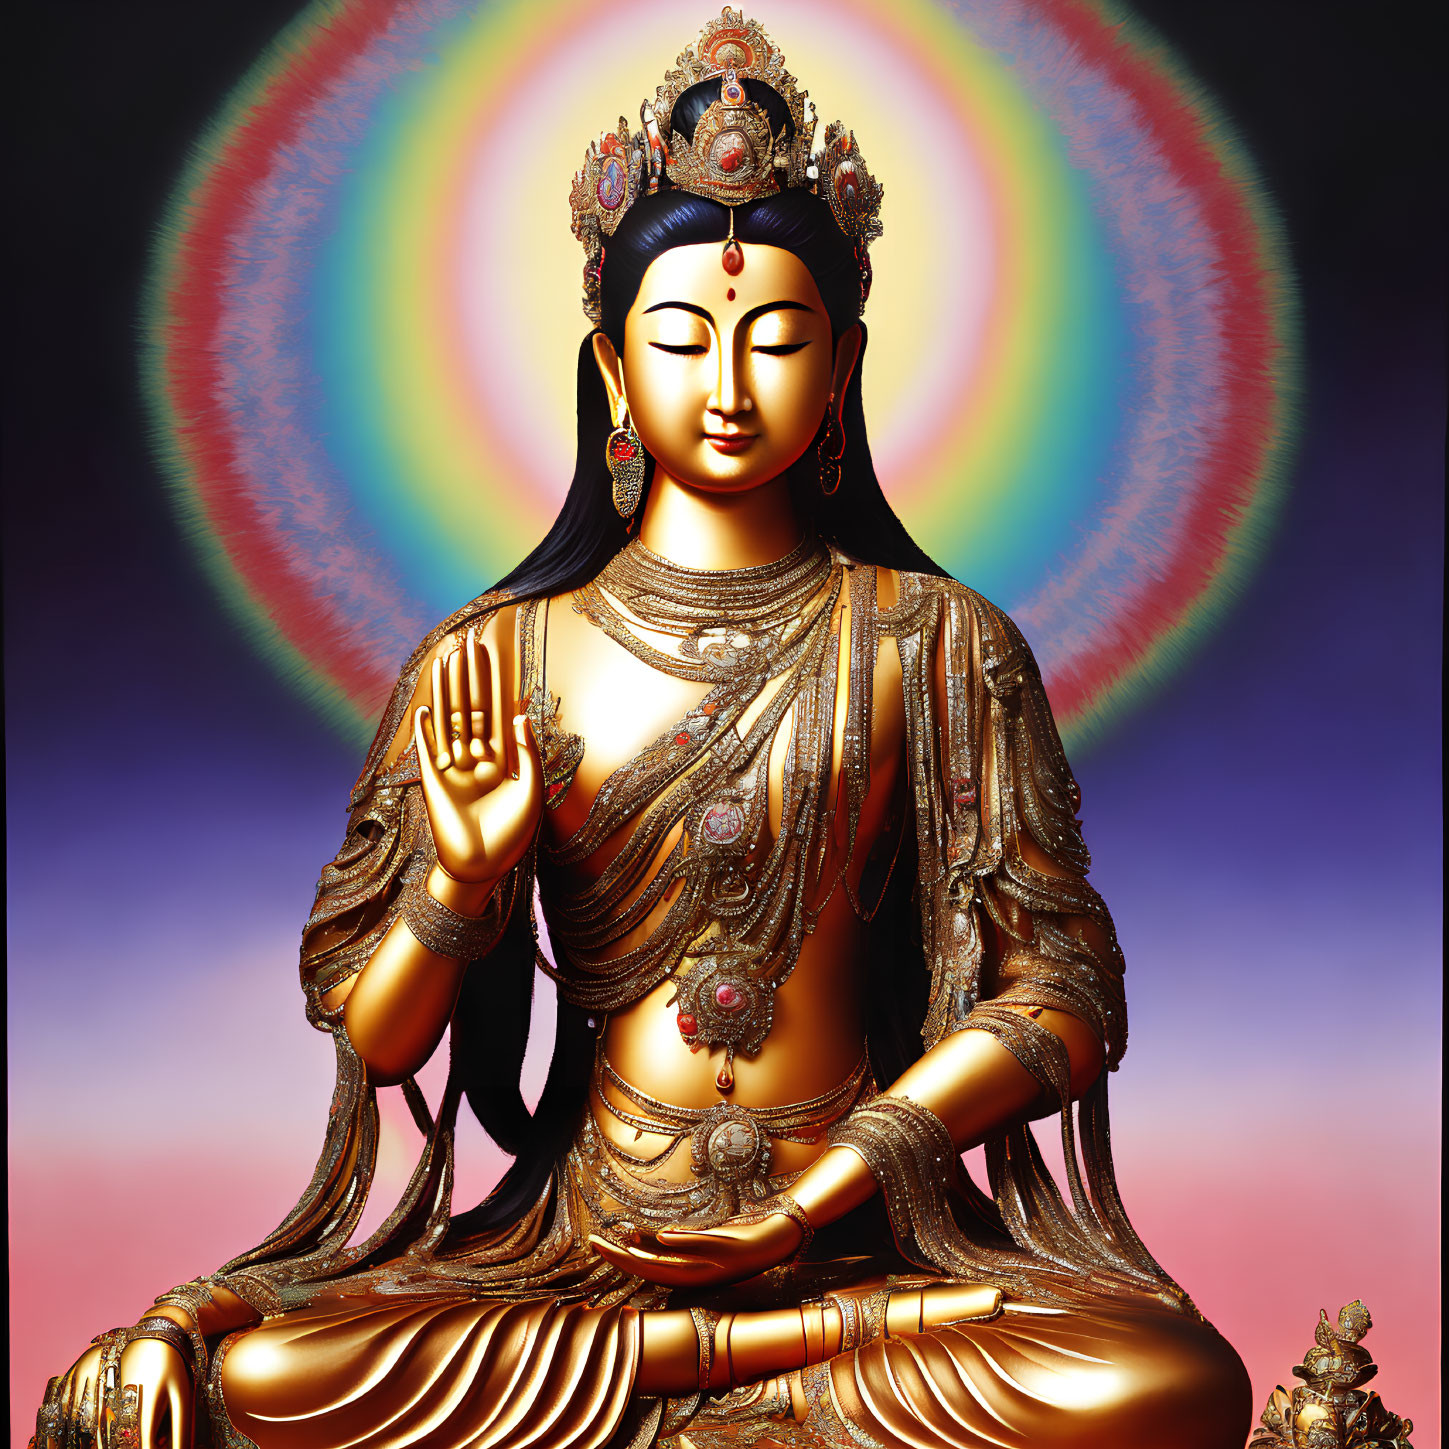 Seated Buddhist deity in golden robes with halo and mudra